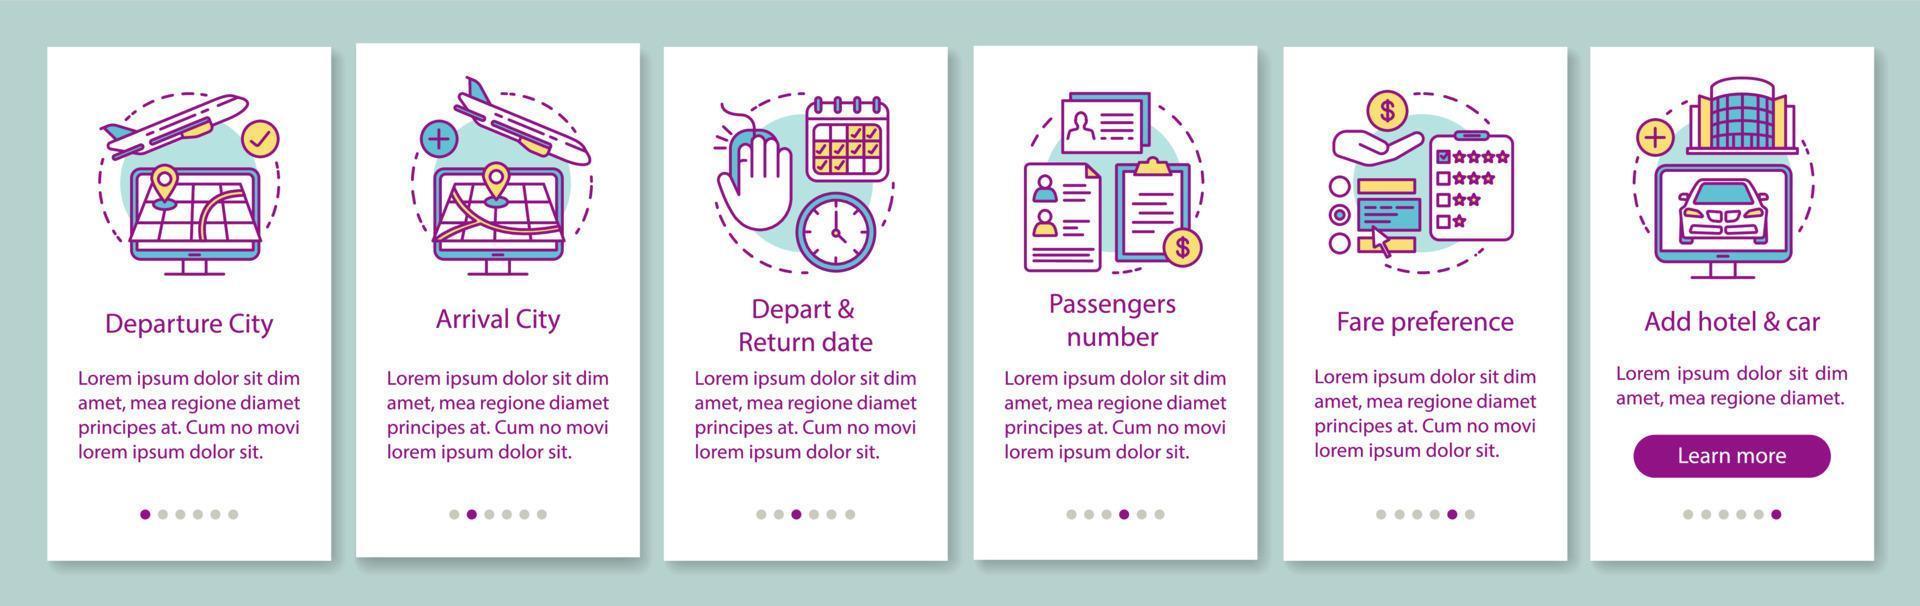 Trip planning onboarding mobile app page screen with linear concepts. Departure and arrival city, hotel walkthrough steps graphic instructions. UX, UI, GUI vector template with illustrations